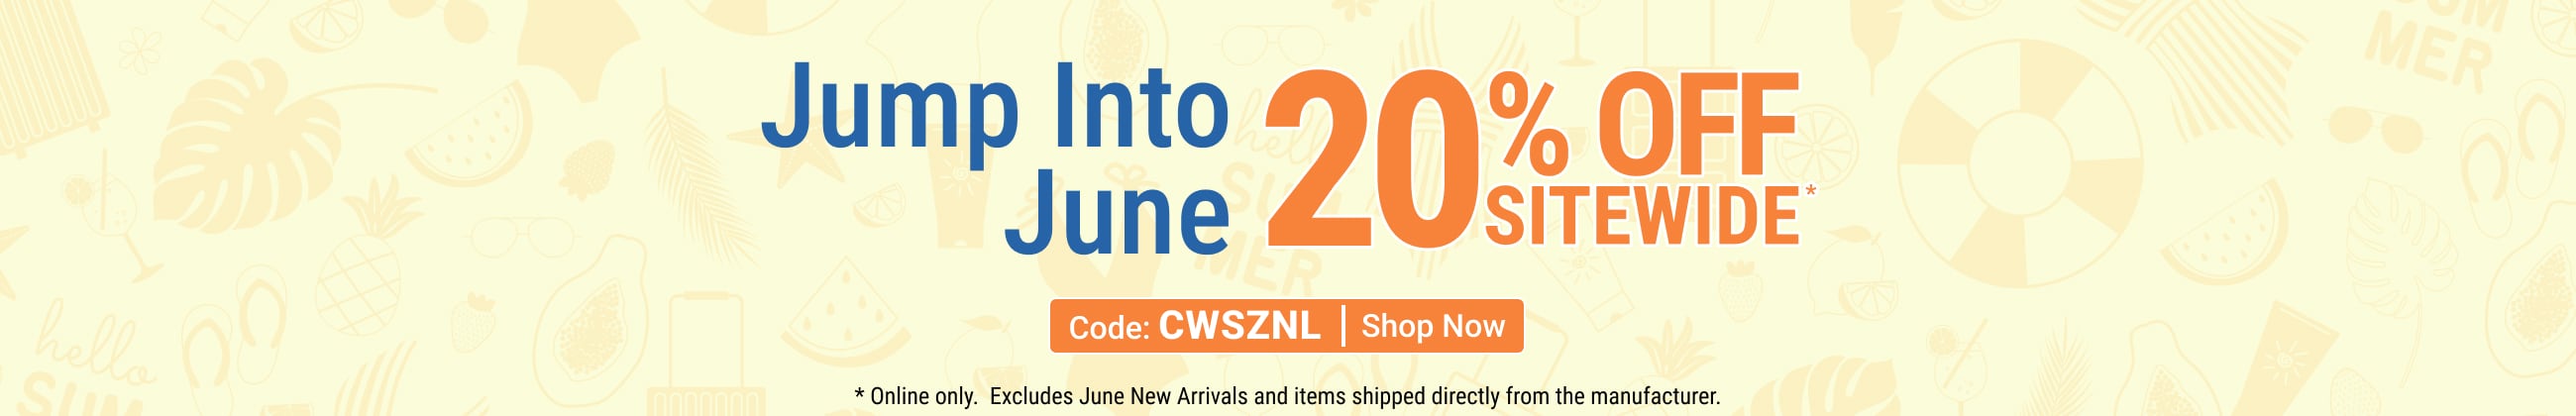 20% off sitewide - shop now